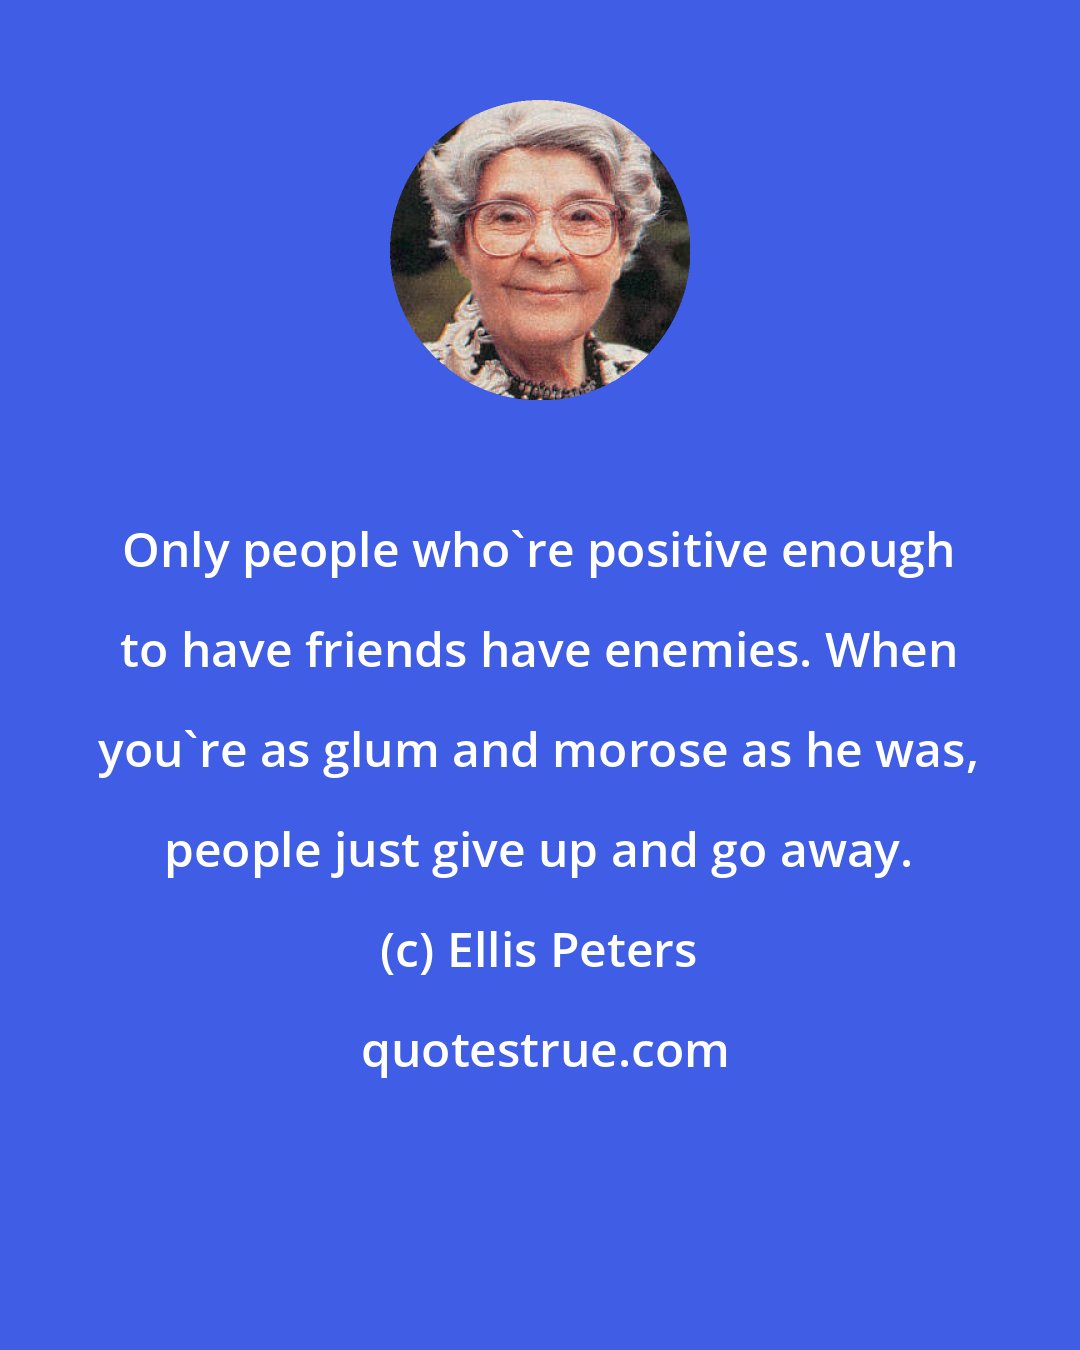 Ellis Peters: Only people who're positive enough to have friends have enemies. When you're as glum and morose as he was, people just give up and go away.